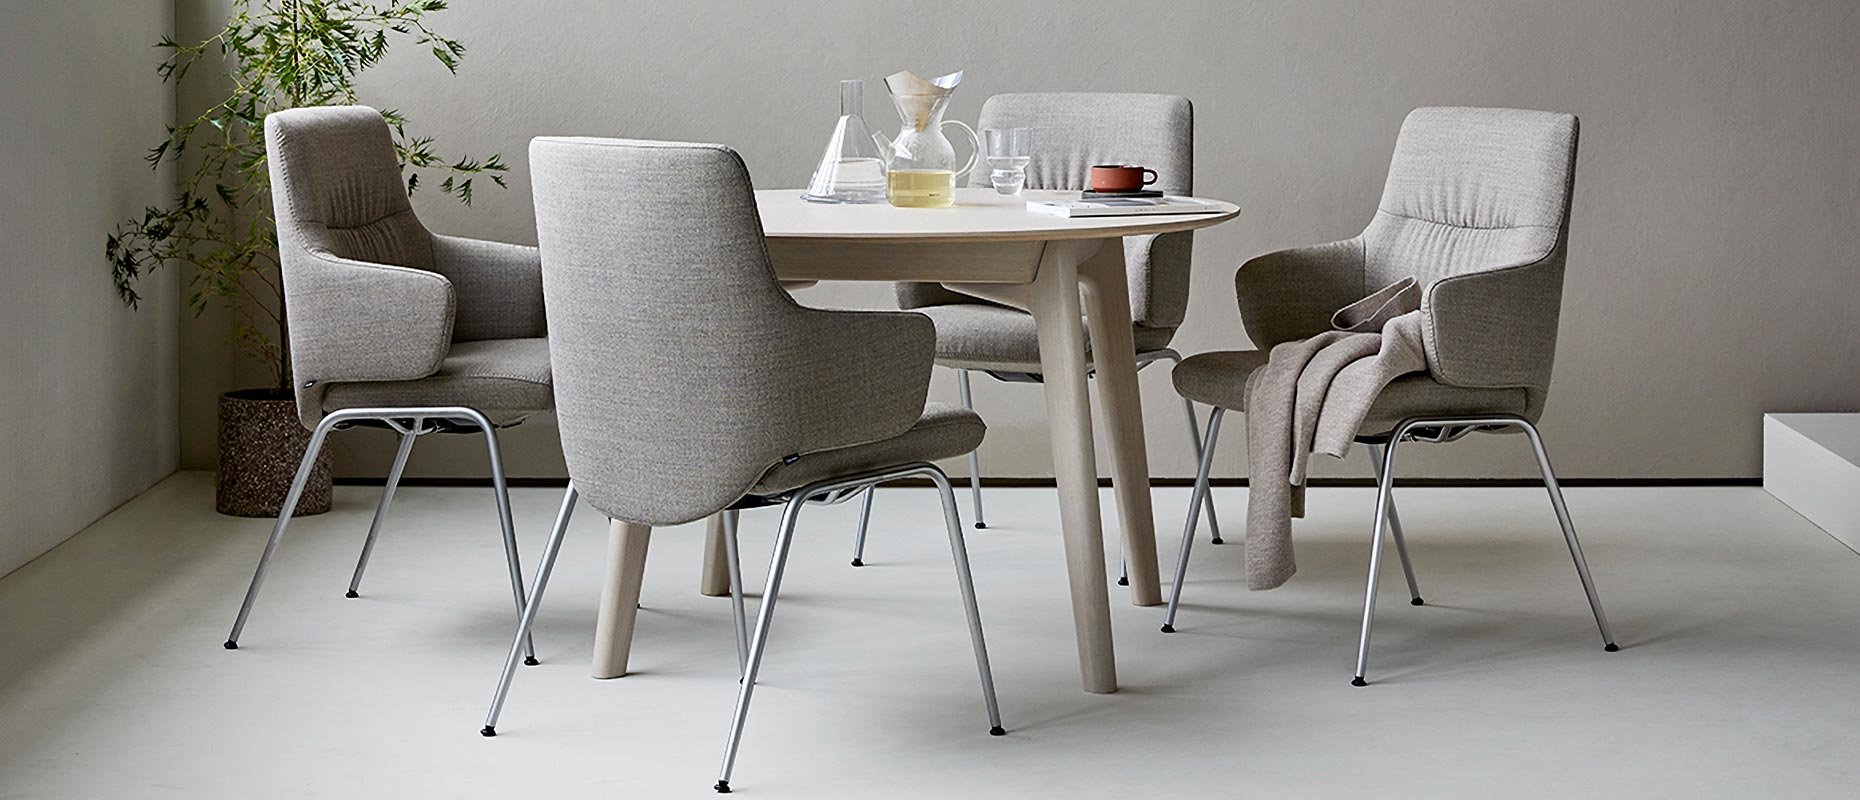 Stressless dining at Forrest Furnishing